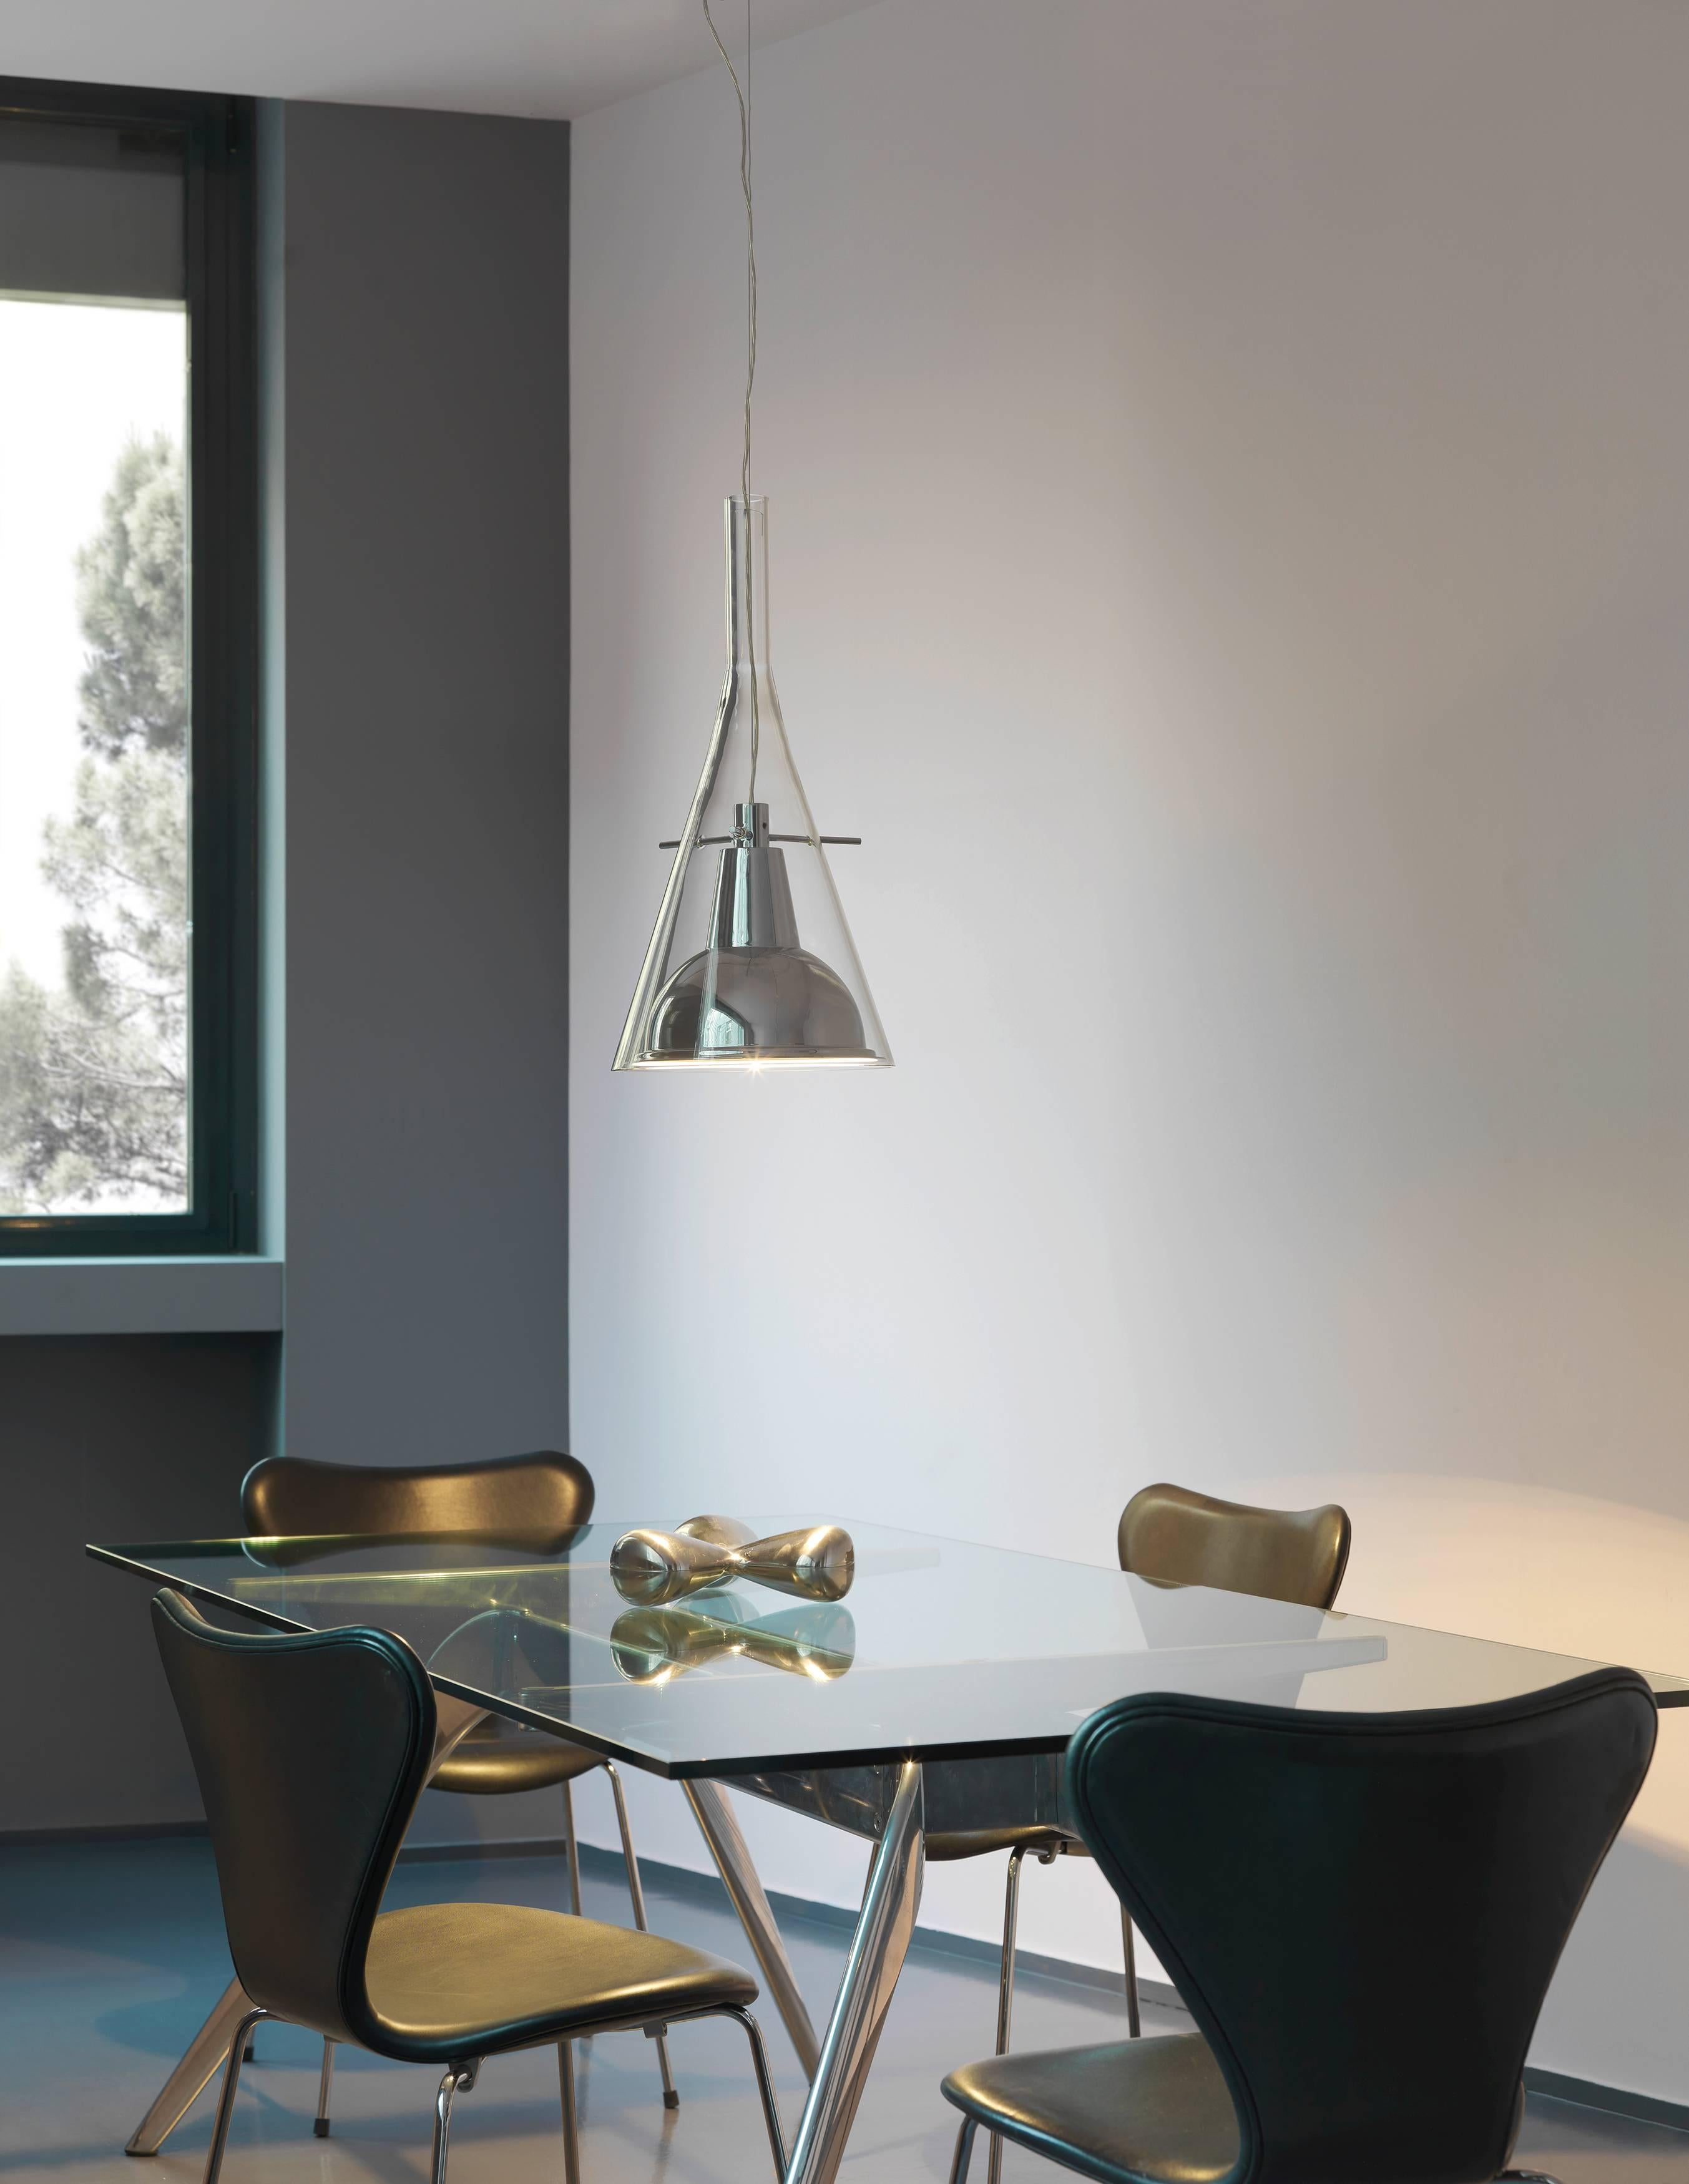 From designer Franco Raggi manufactured by Fontana Arte, the flute suspension lamp was designed in 1999 and is a glass cone that holds the chromed aluminium reflector, supported by three slender metal rods. Equilibrium and lightness for this family